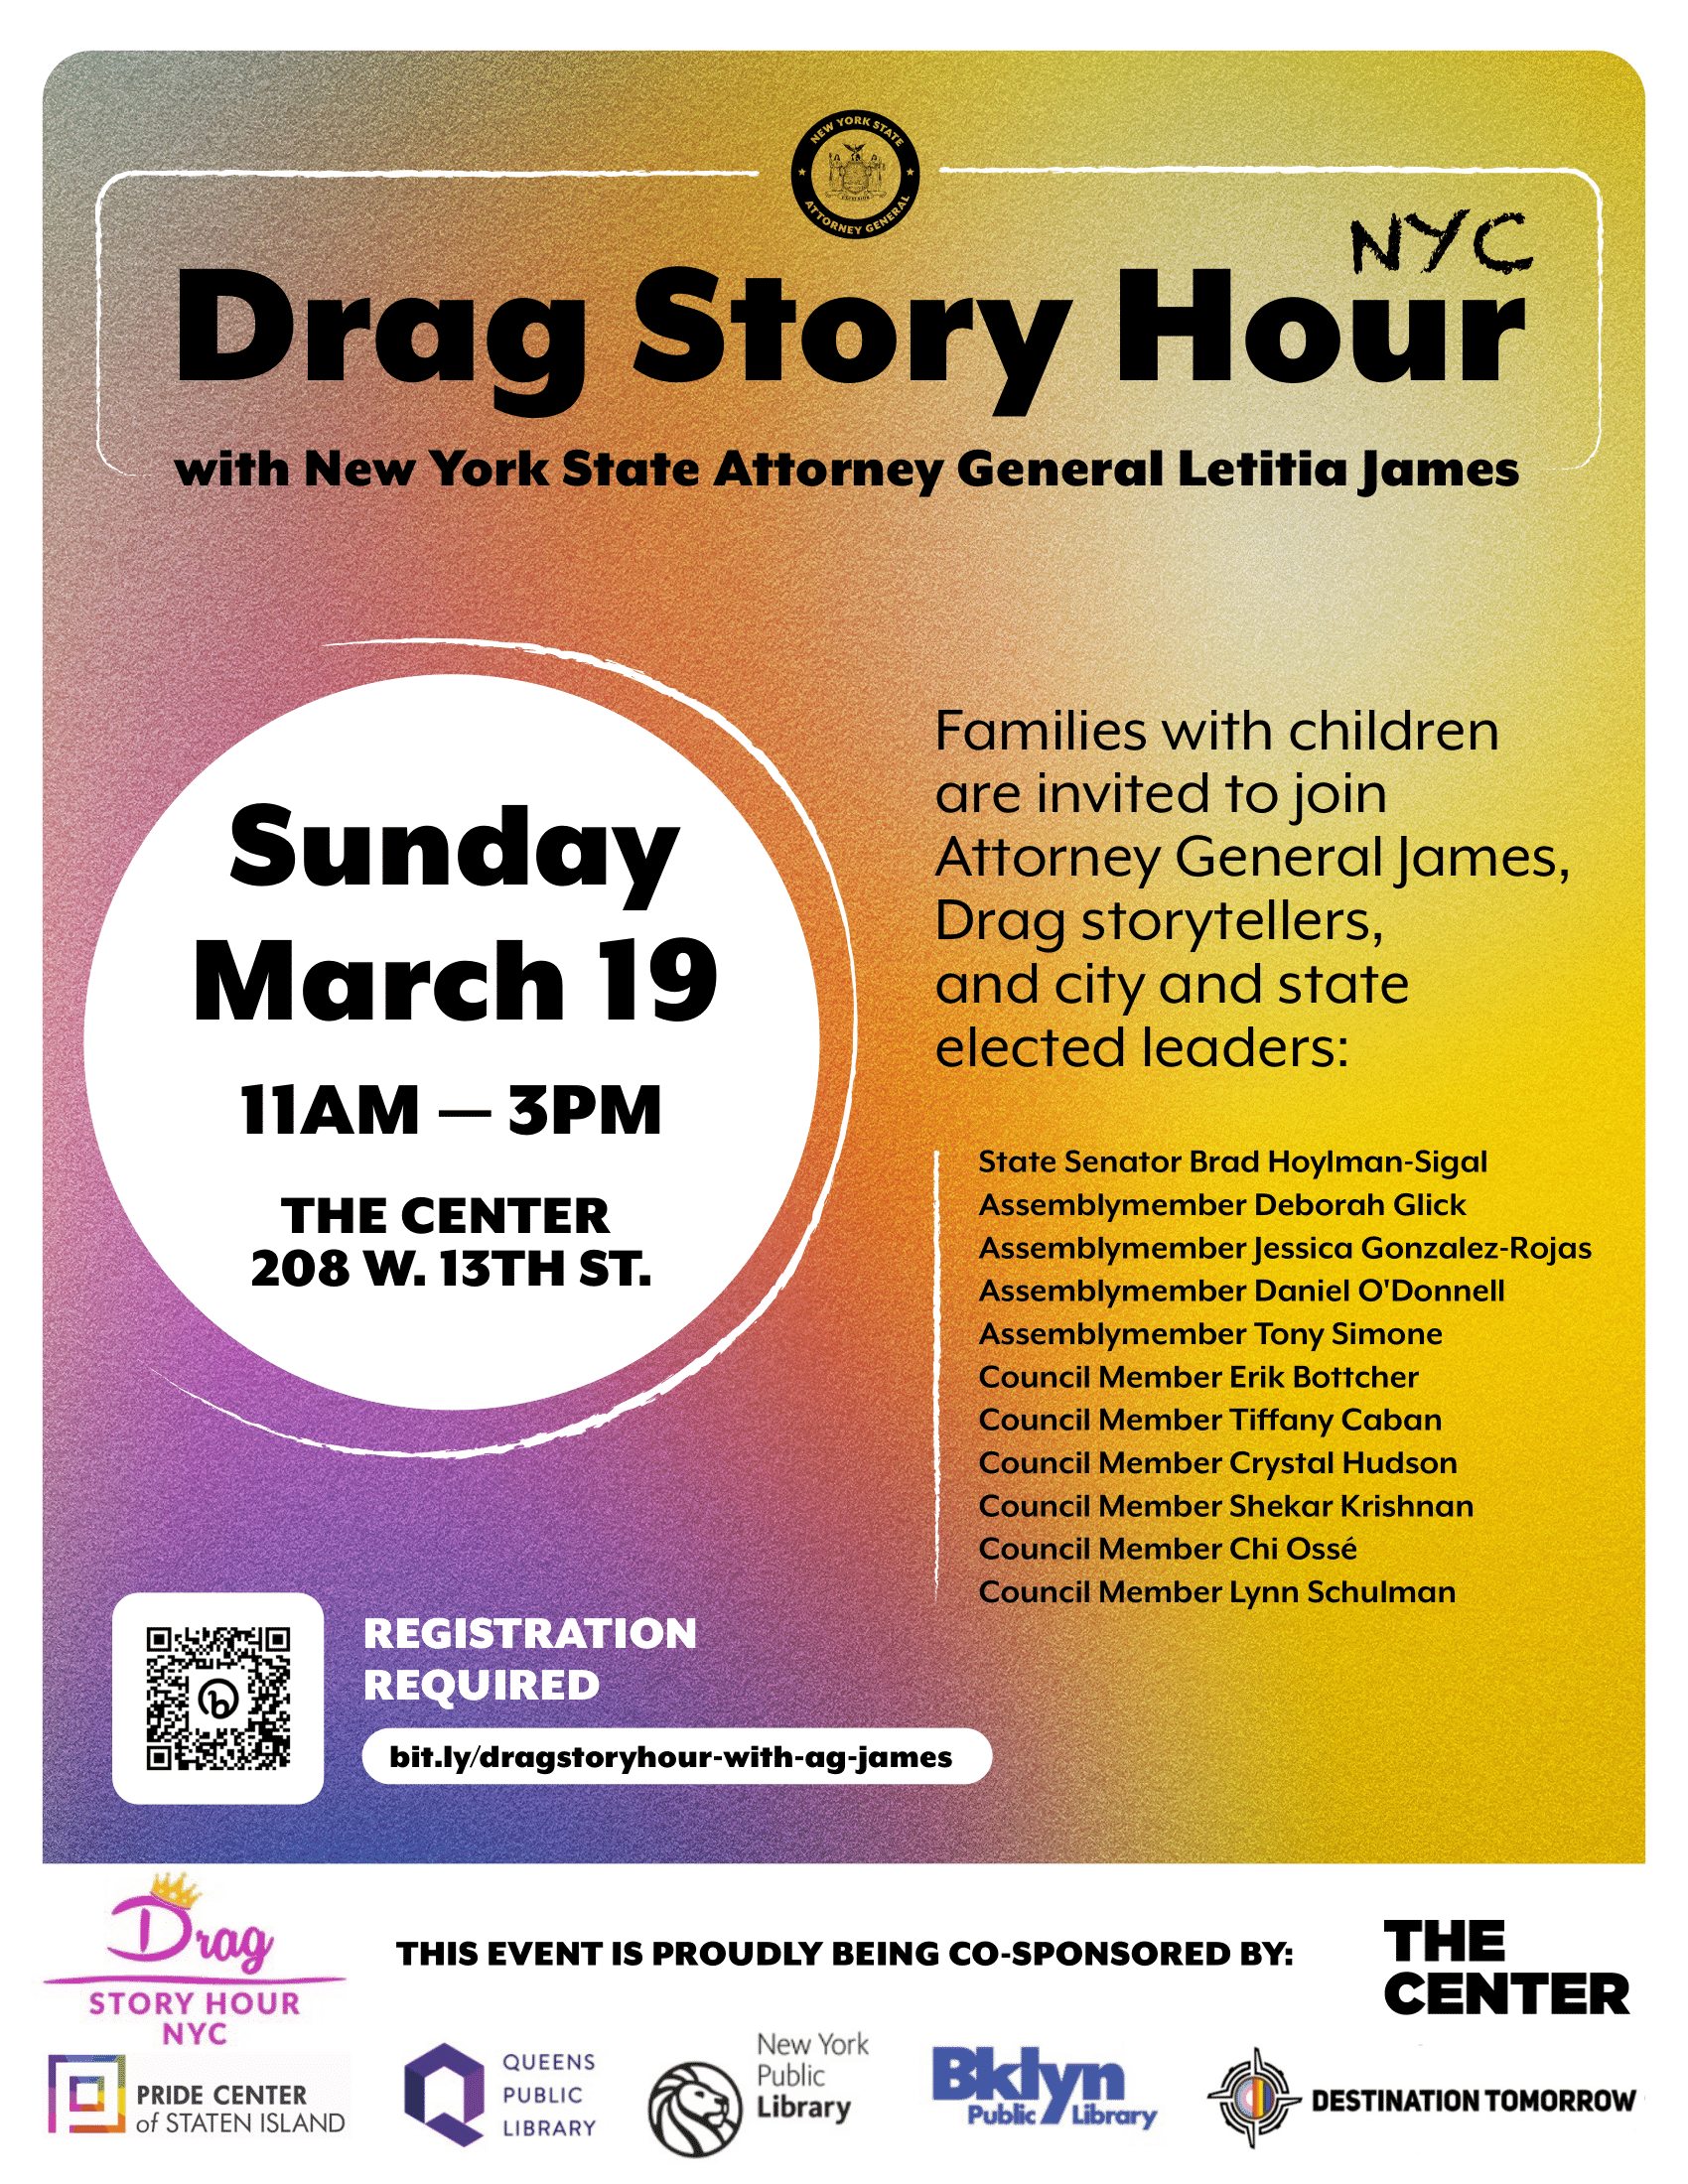 NYC Drag Story Hour With New York State Attorney General Letitia James. Sunday March 19th 11am-3pm